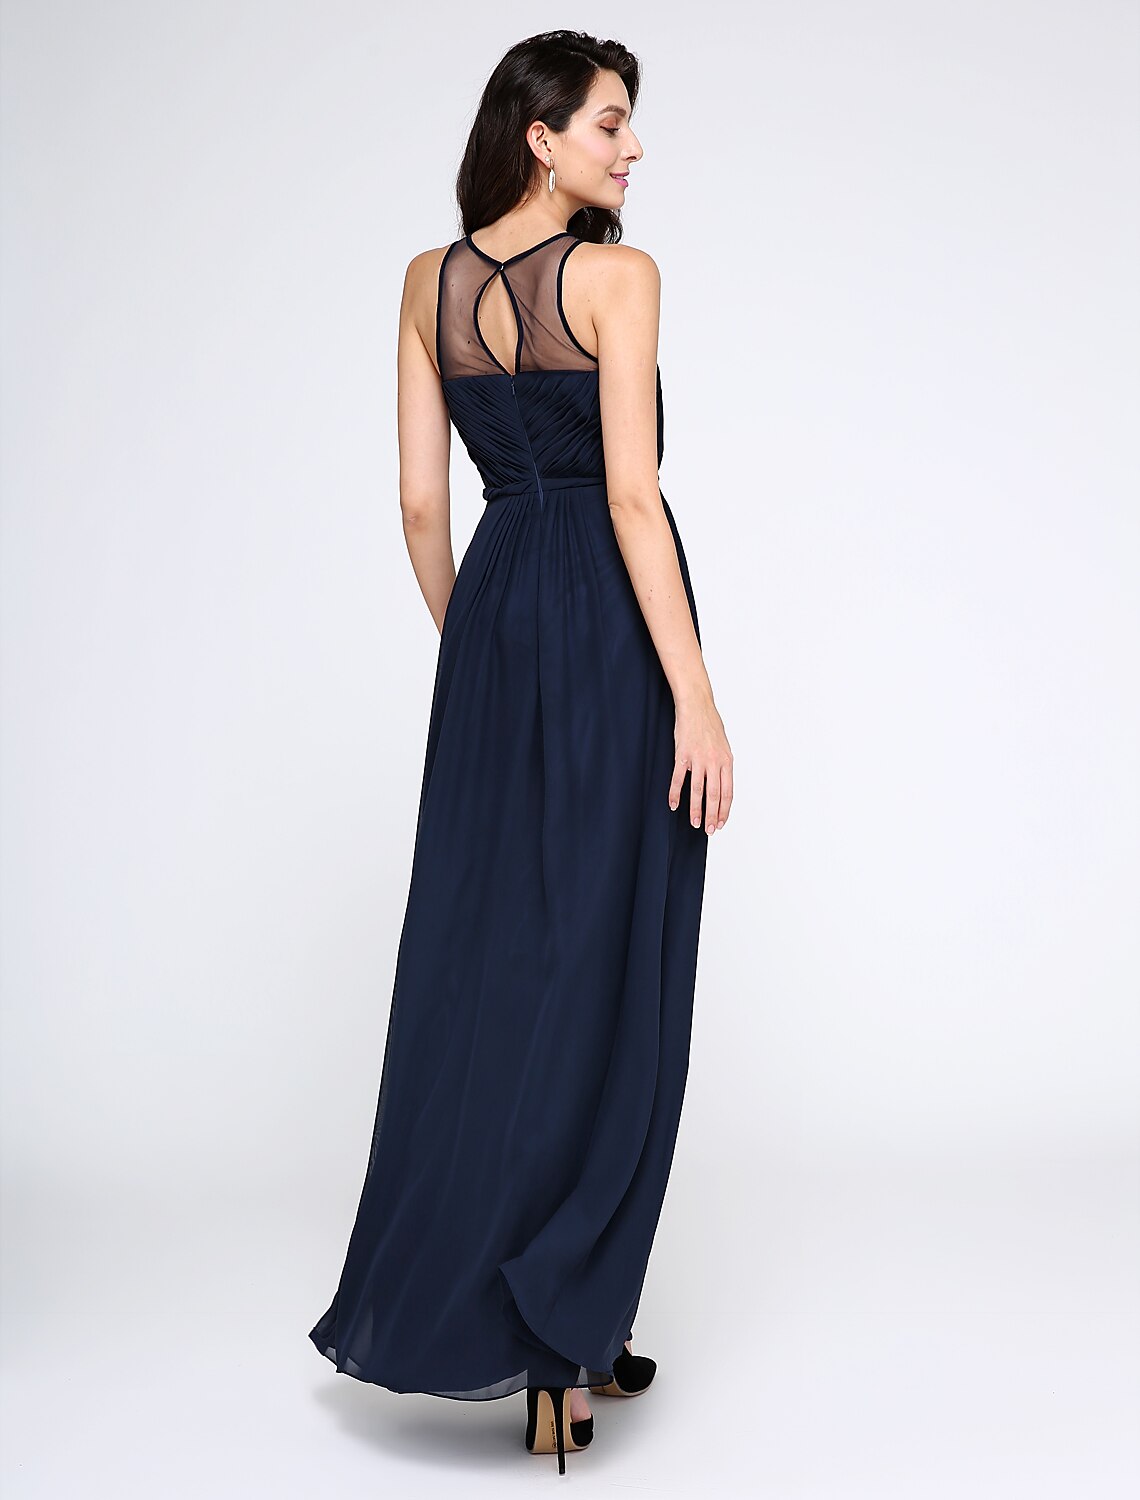 Sheath / Column Elegant Dress Holiday Cocktail Party Ankle Length Sleeveless Illusion Neck Chiffon with Side Draping